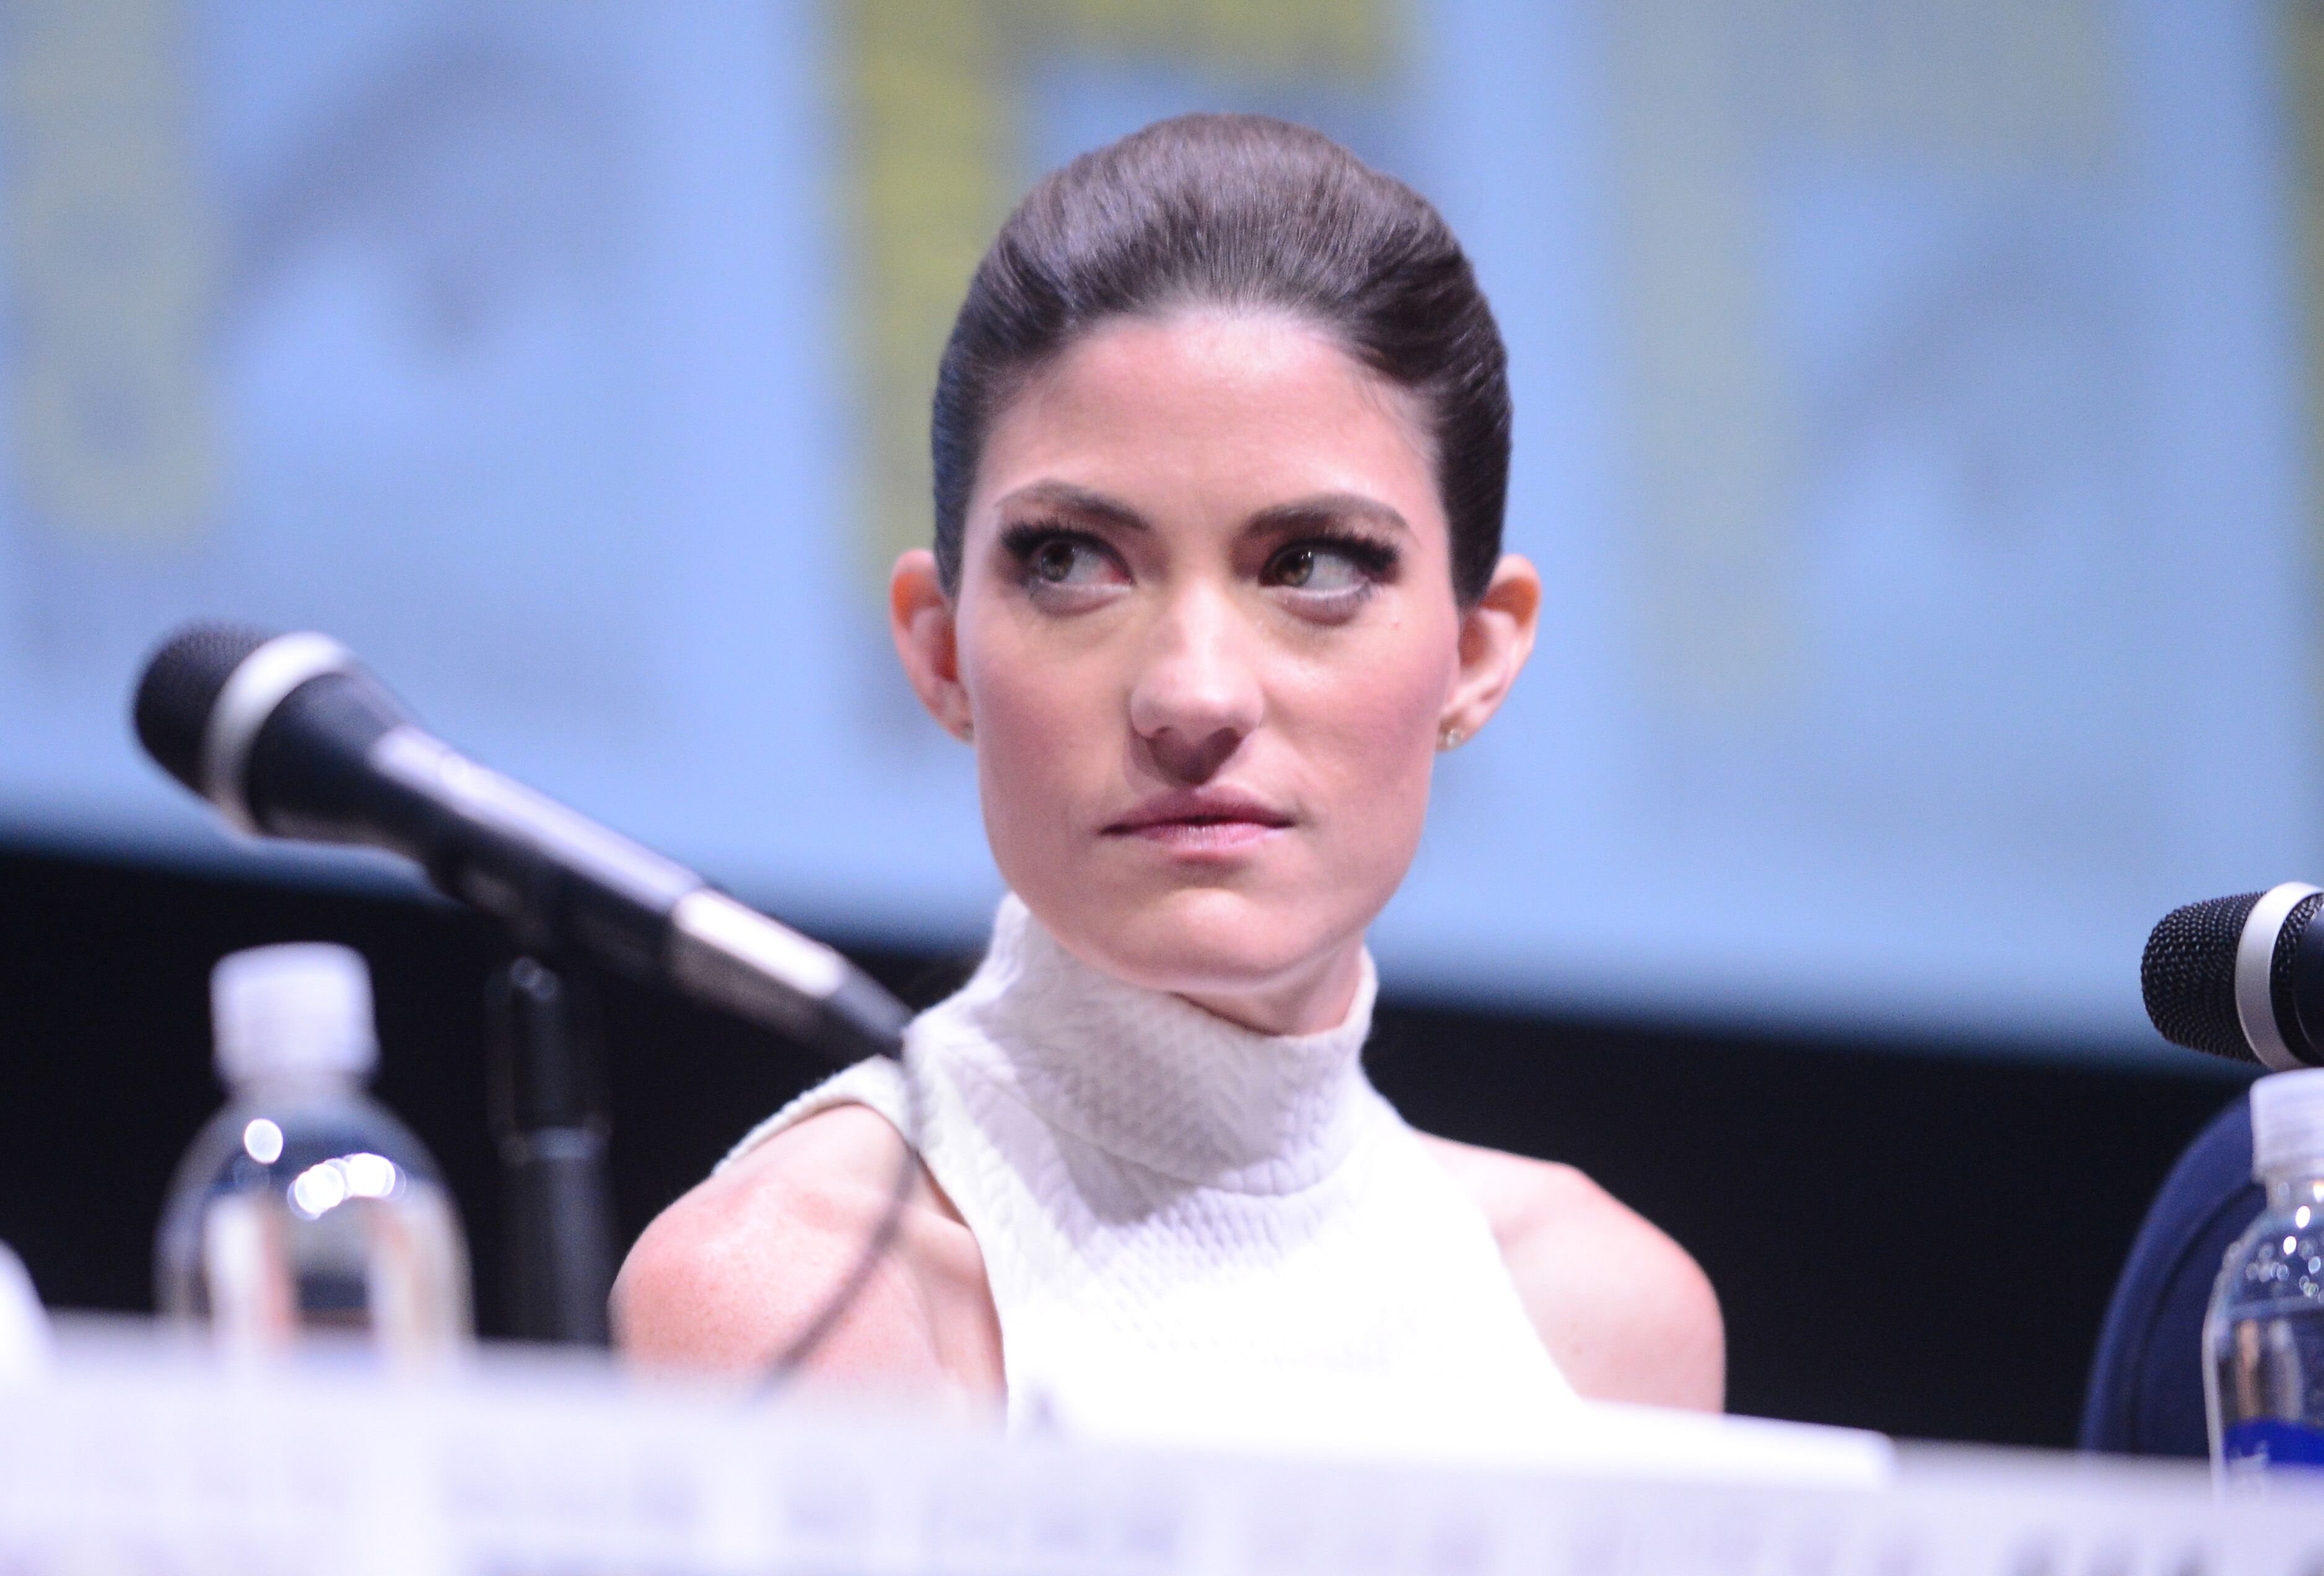 Jennifer Carpenter speaks onstage at Showtime's "Dexter" panel during Comic-Con International 2013 at San Diego Convention Center on July 18, 2013 in San Diego, California. | Source: Getty Images